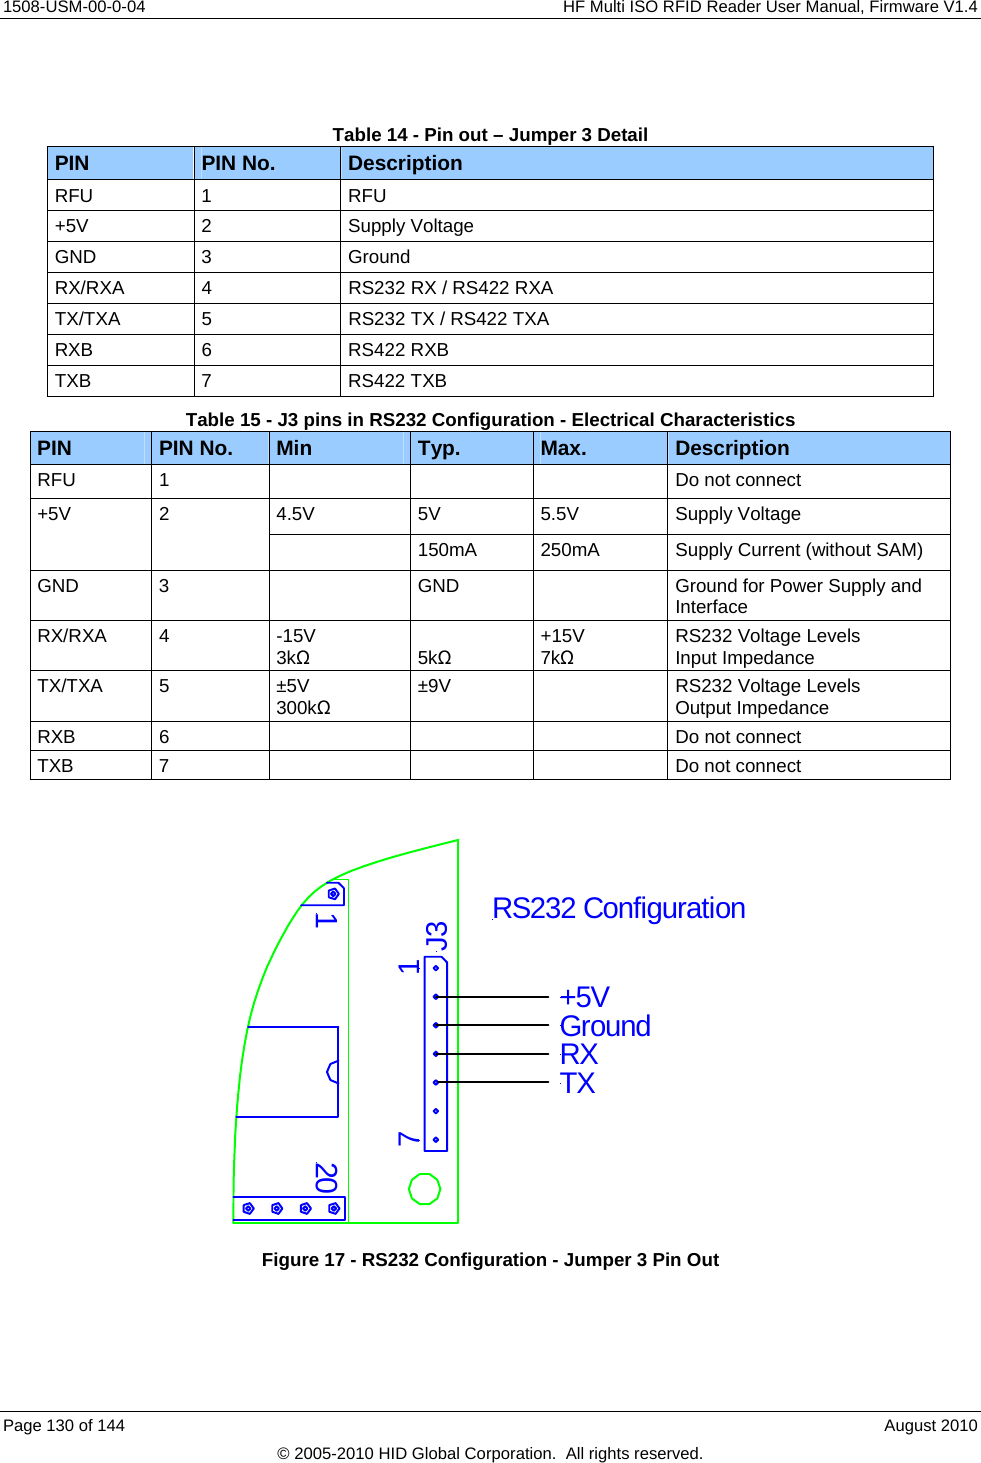     1508-USM-00-0-04    HF Multi ISO RFID Reader User Manual, Firmware V1.4  Table 14 - Pin out – Jumper 3 Detail PIN  PIN No.  Description RFU 1  RFU +5V 2  Supply Voltage GND 3  Ground RX/RXA  4  RS232 RX / RS422 RXA TX/TXA  5  RS232 TX / RS422 TXA RXB 6  RS422 RXB TXB 7  RS422 TXB Table 15 - J3 pins in RS232 Configuration - Electrical Characteristics  PIN No.  Min  Typ.  Max.  Description PIN RFU  1        Do not connect 4.5V 5V 5.5V Supply Voltage +5V 2   150mA  250mA  Supply Current (without SAM) GND  3    GND    Ground for Power Supply and Interface RX/RXA 4  -15V 3kΩ  5kΩ +15V 7kΩ RS232 Voltage Levels Input Impedance TX/TXA 5  ±5V 300kΩ ±9V    RS232 Voltage Levels Output Impedance RXB  6        Do not connect TXB  7        Do not connect  12017 J3+5VGroundRXTXRS232 Configuration Figure 17 - RS232 Configuration - Jumper 3 Pin Out Page 130 of 144    August 2010 © 2005-2010 HID Global Corporation.  All rights reserved. 